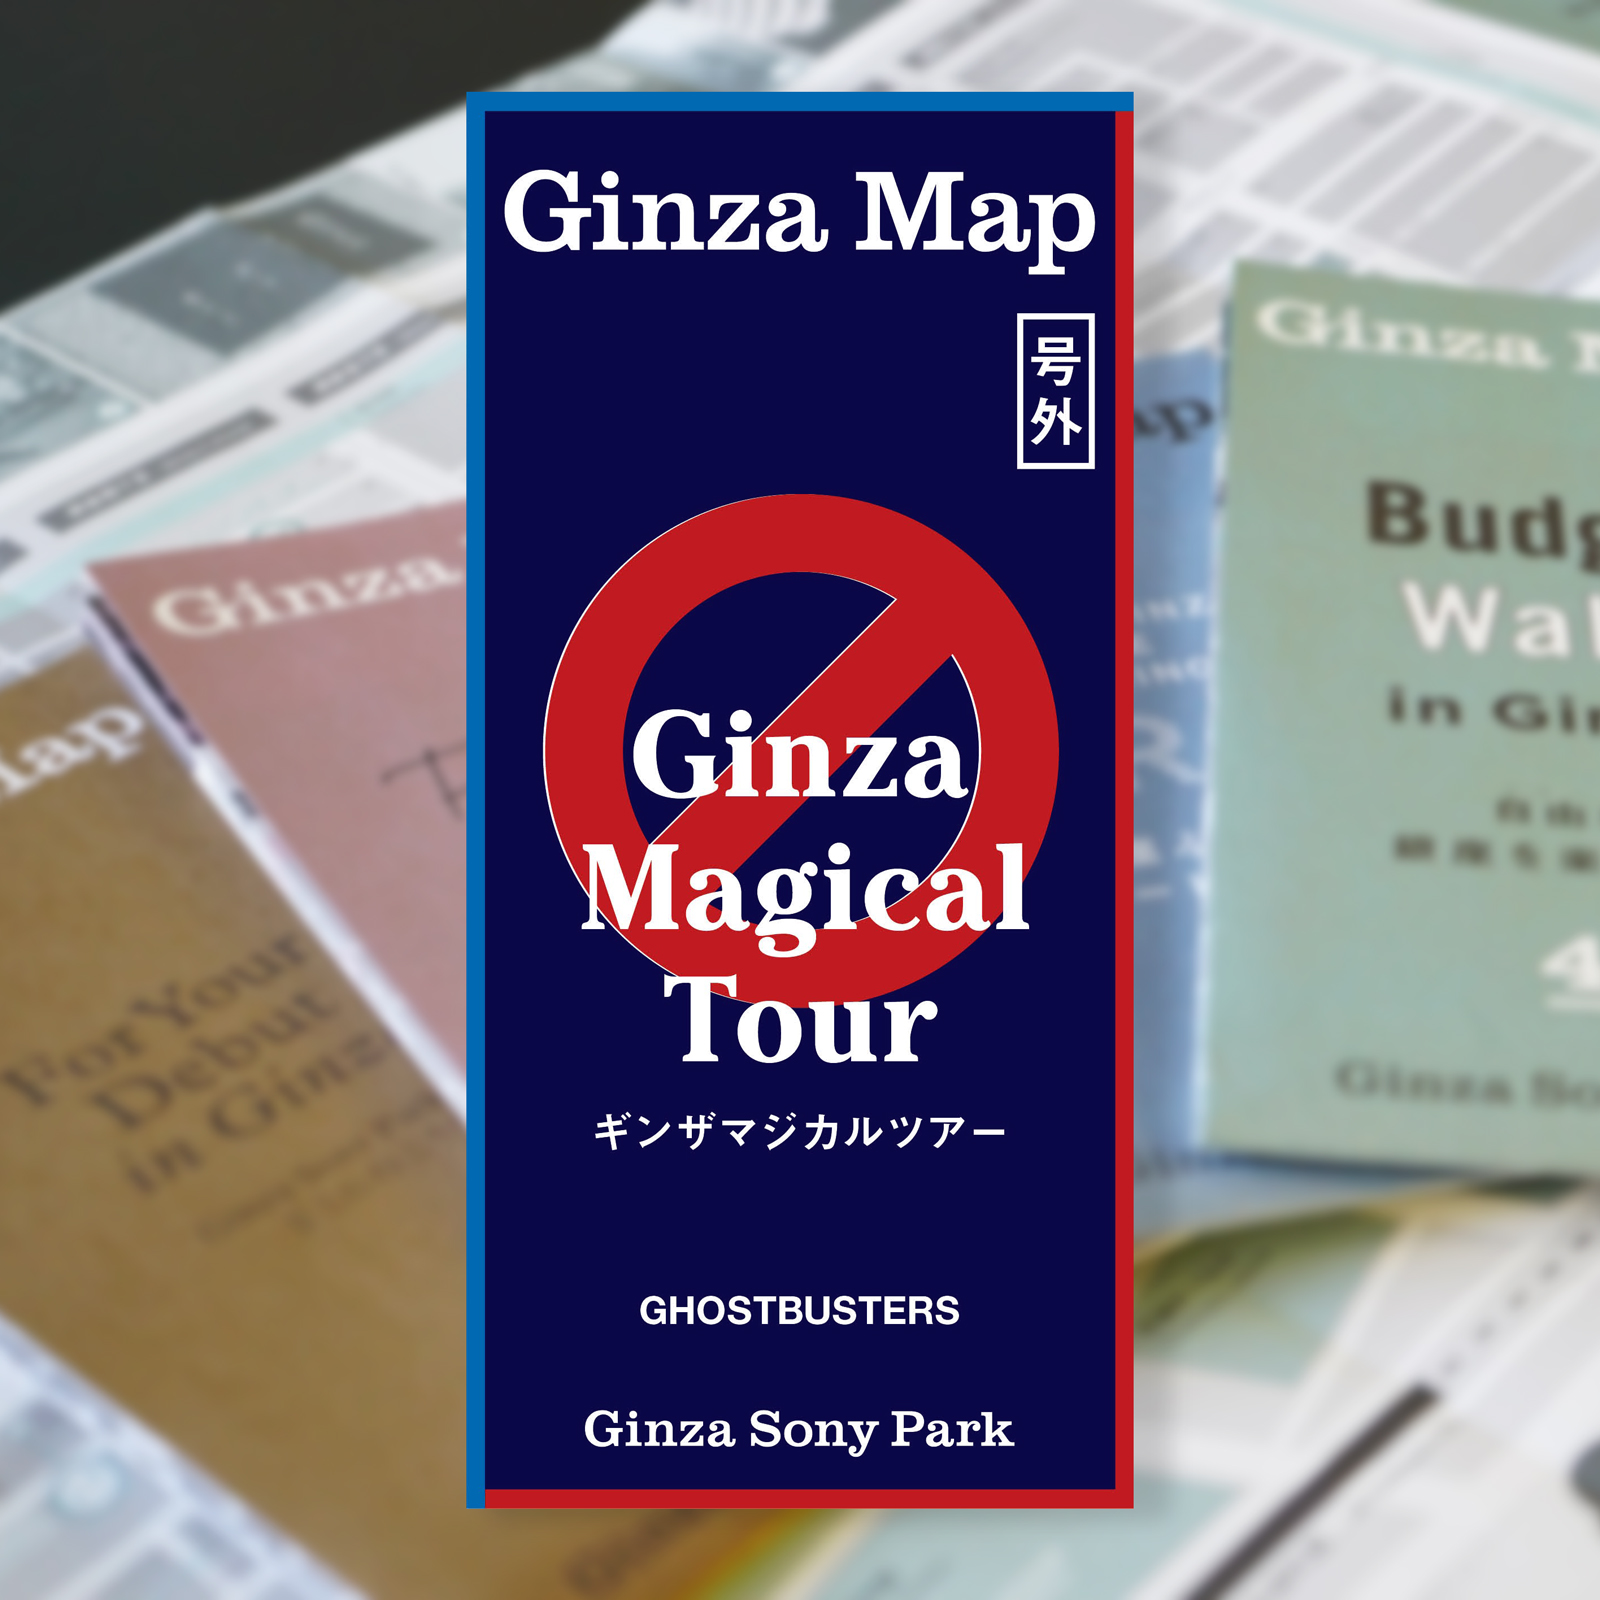 Guide map to Ginza Magical Tour